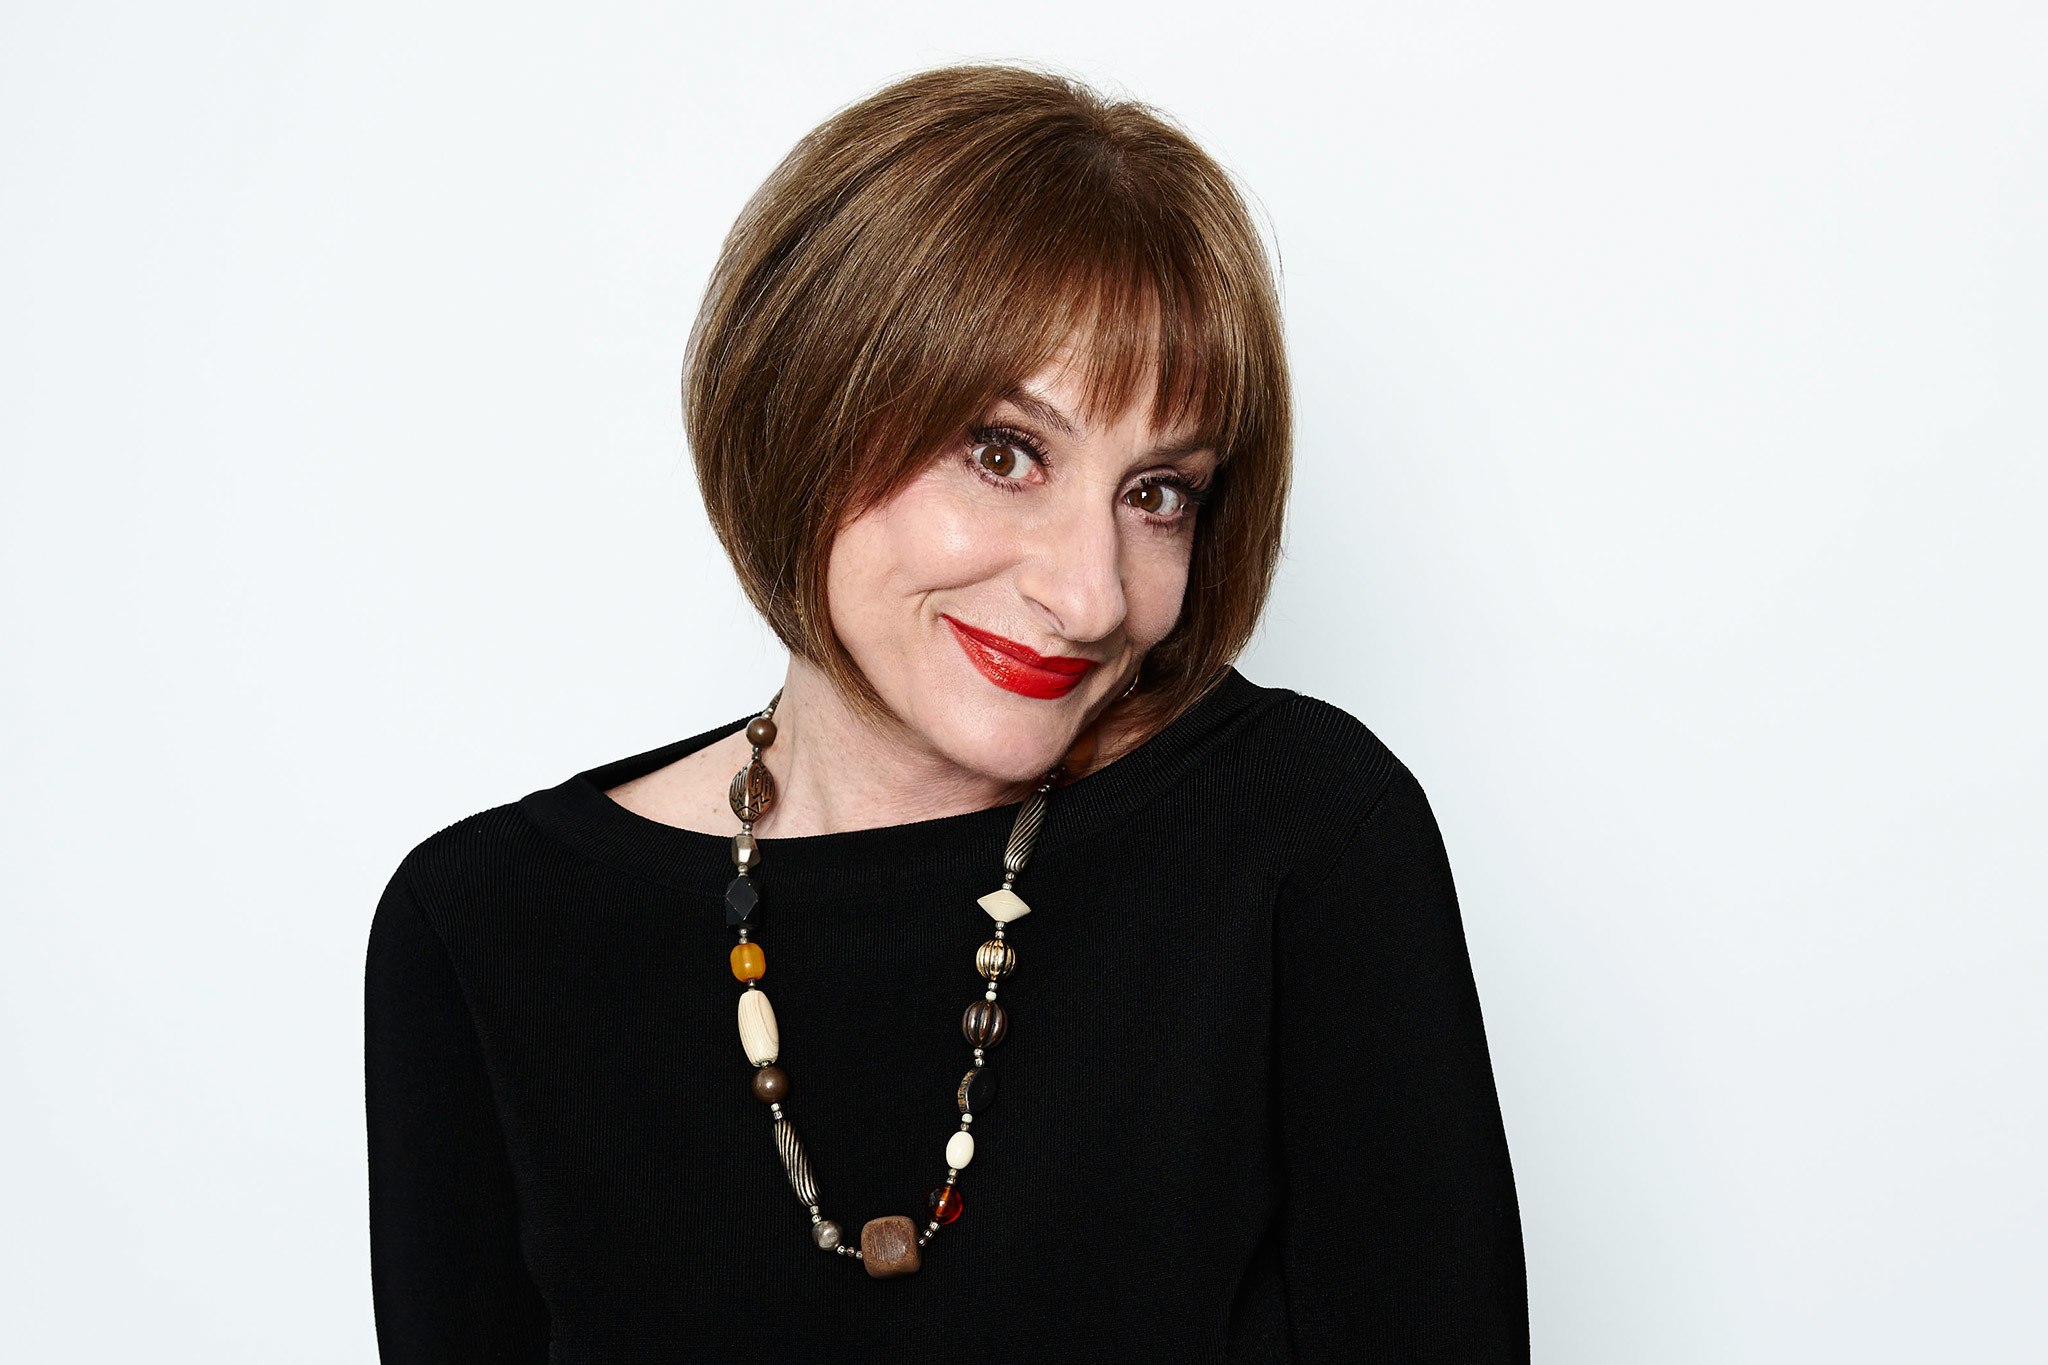 More Pictures Of Patti LuPone. 